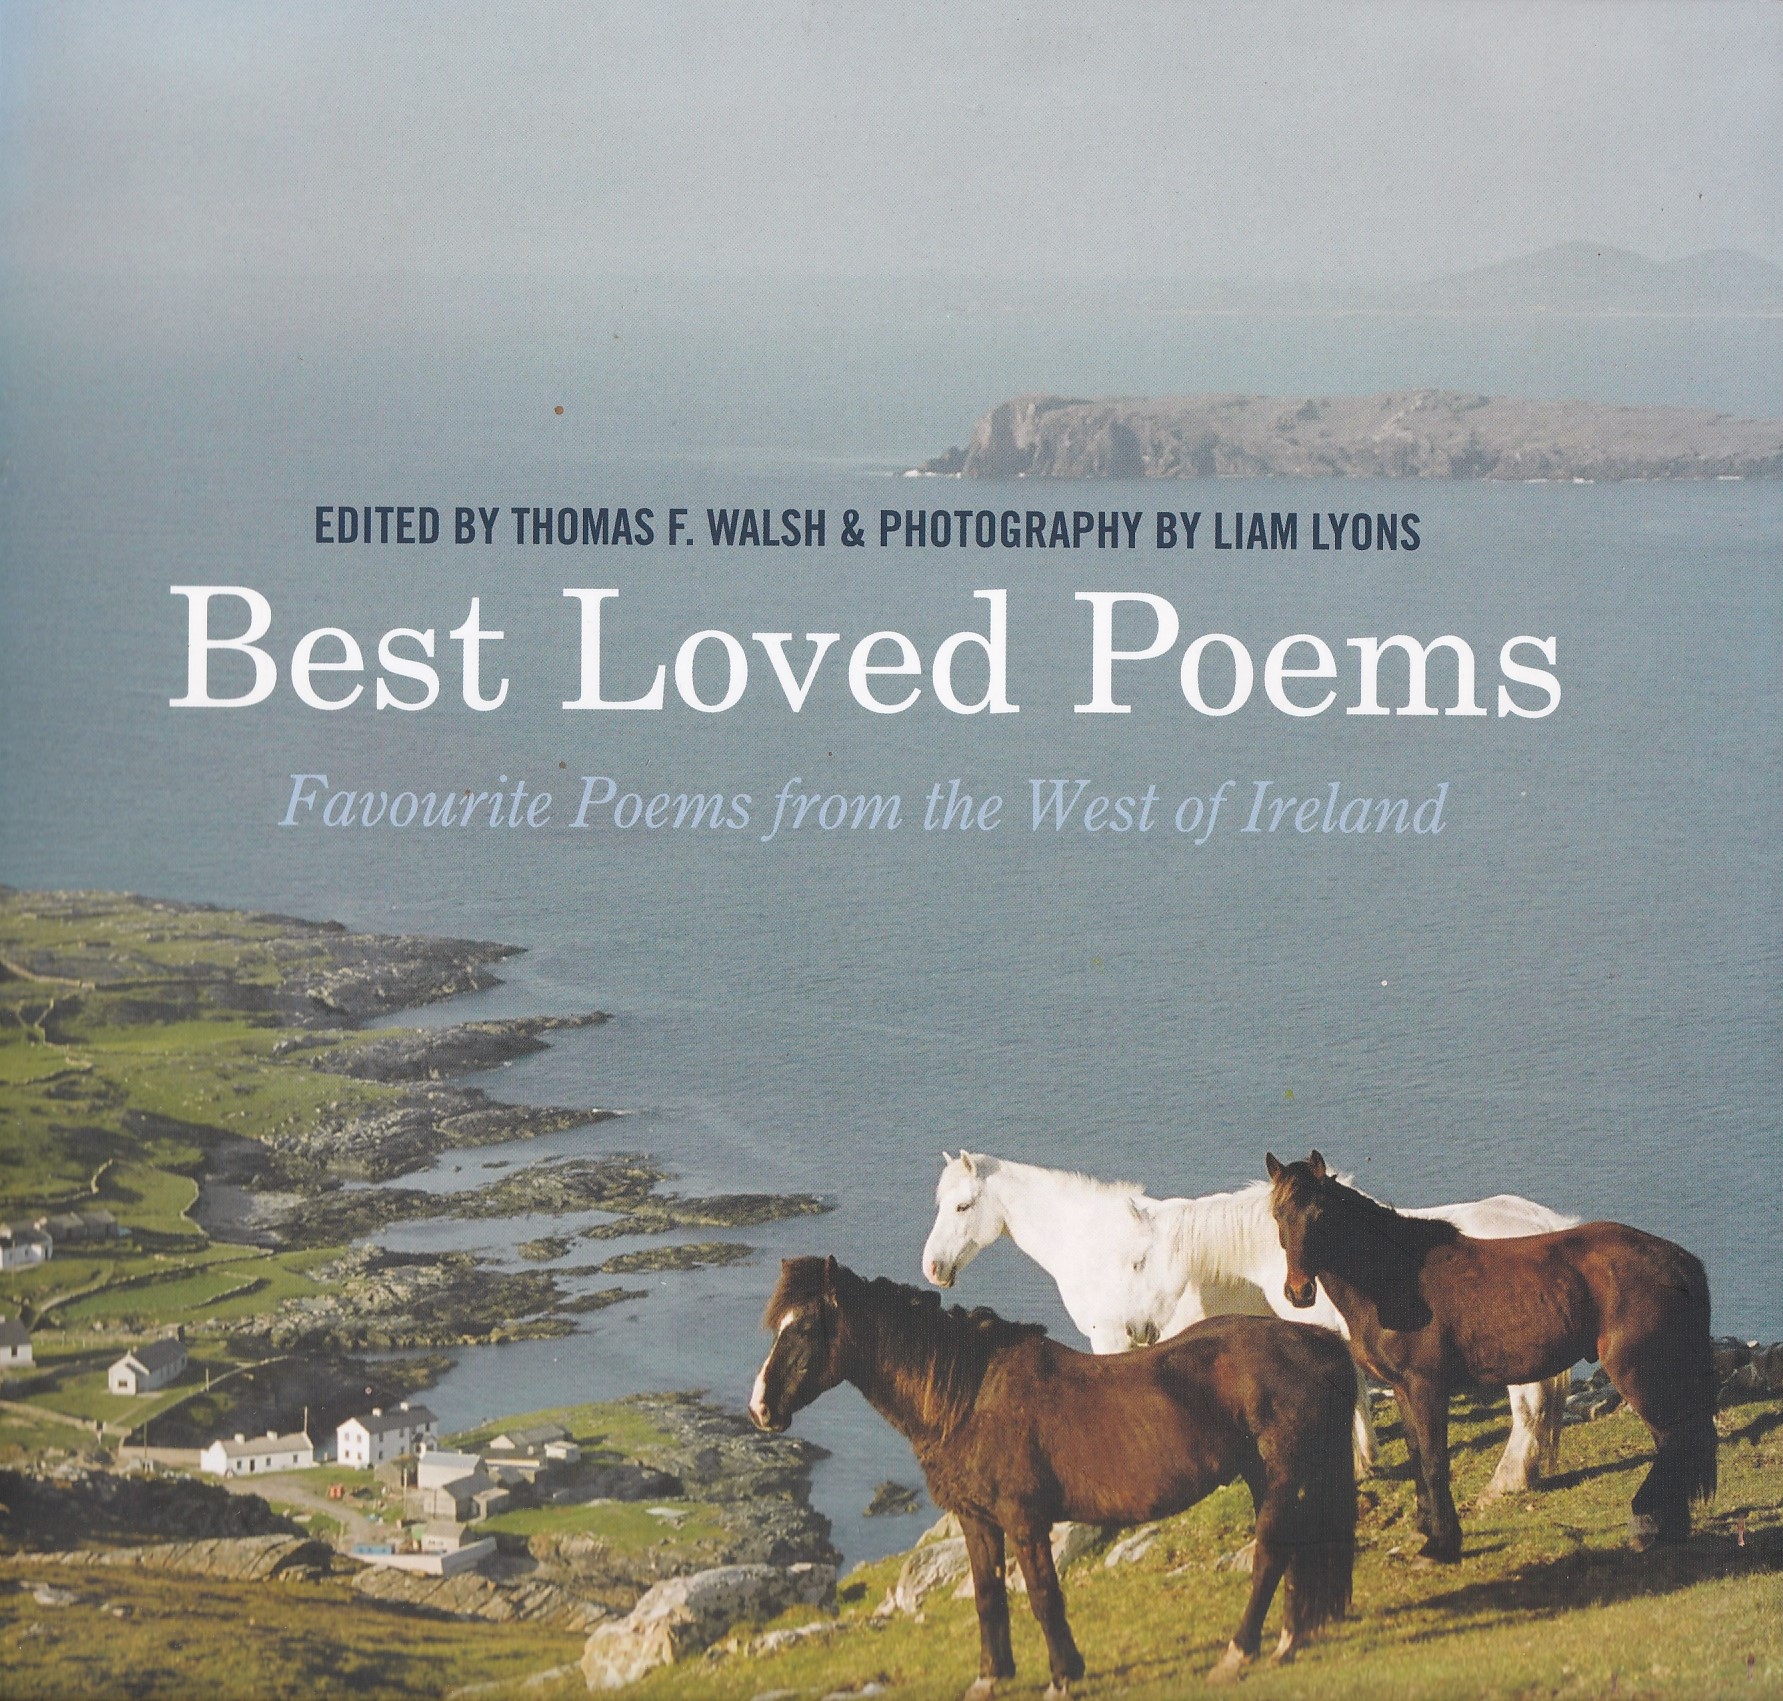 Best Loved Poems: Favorite Poems from the West of Ireland (Signed) by Thomas Walsh & Liam Lyons